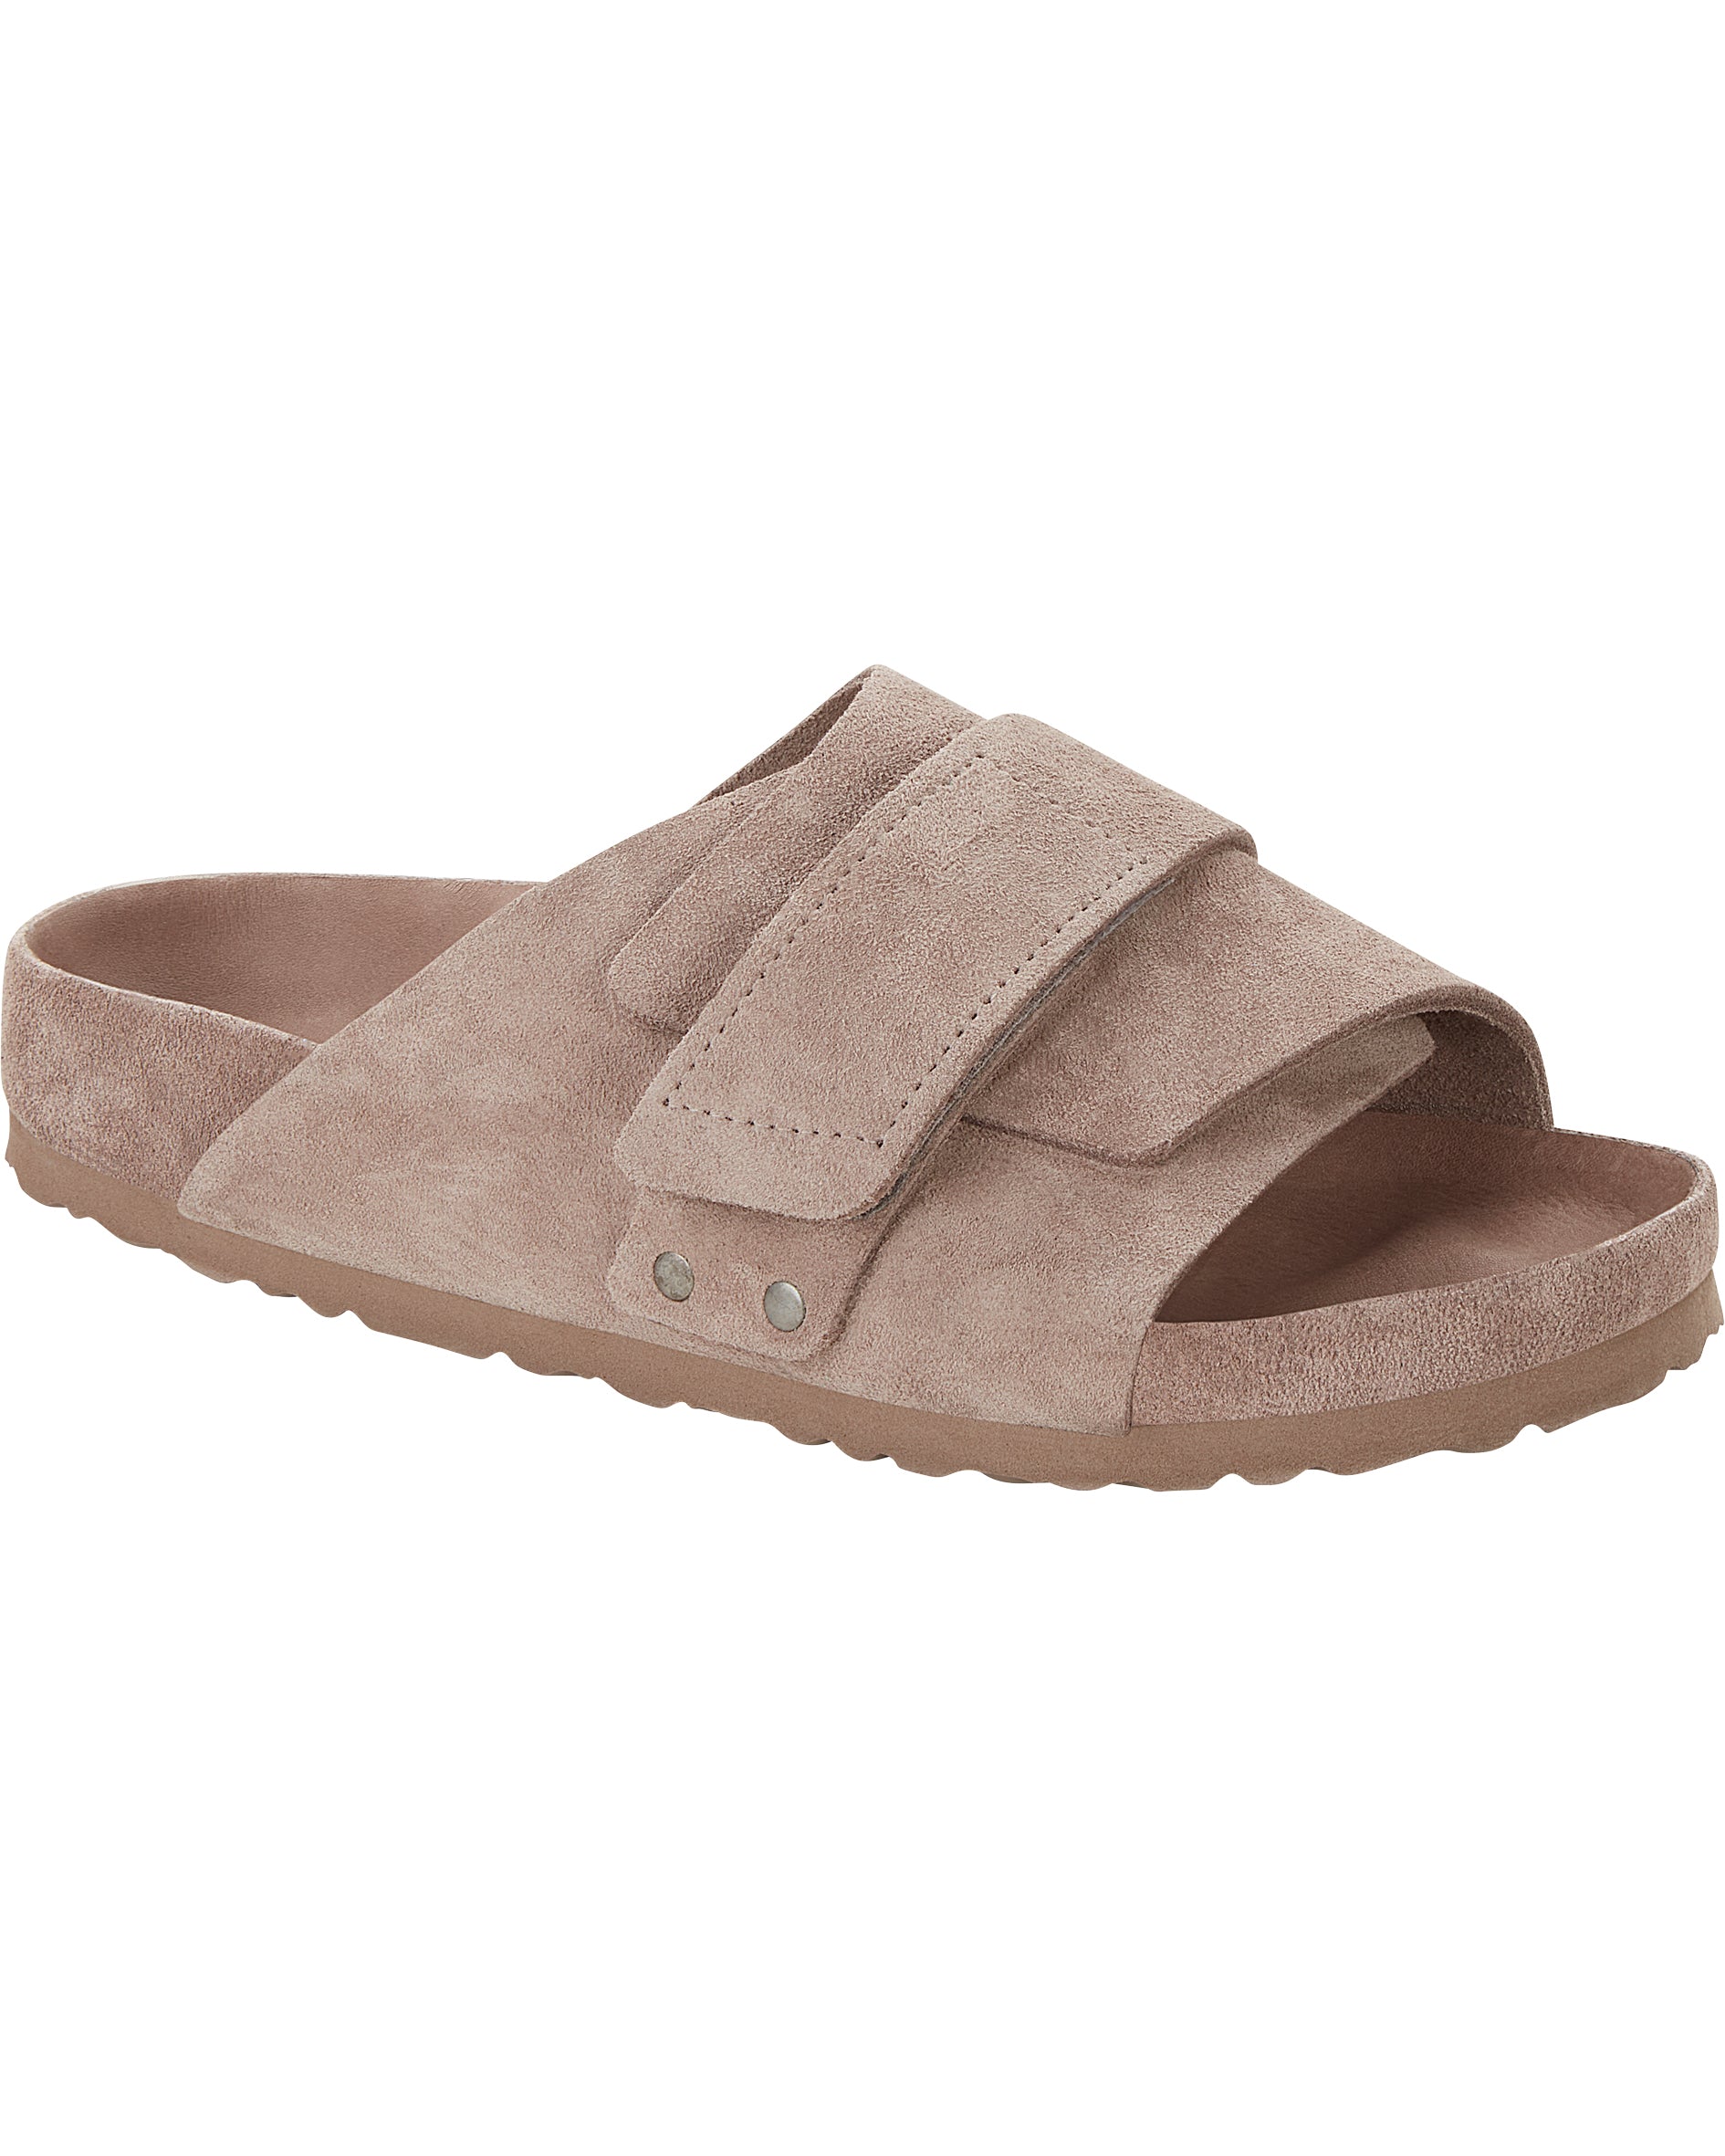 Kyoto Exquisite Gray Taupe Suede Leather Sandals